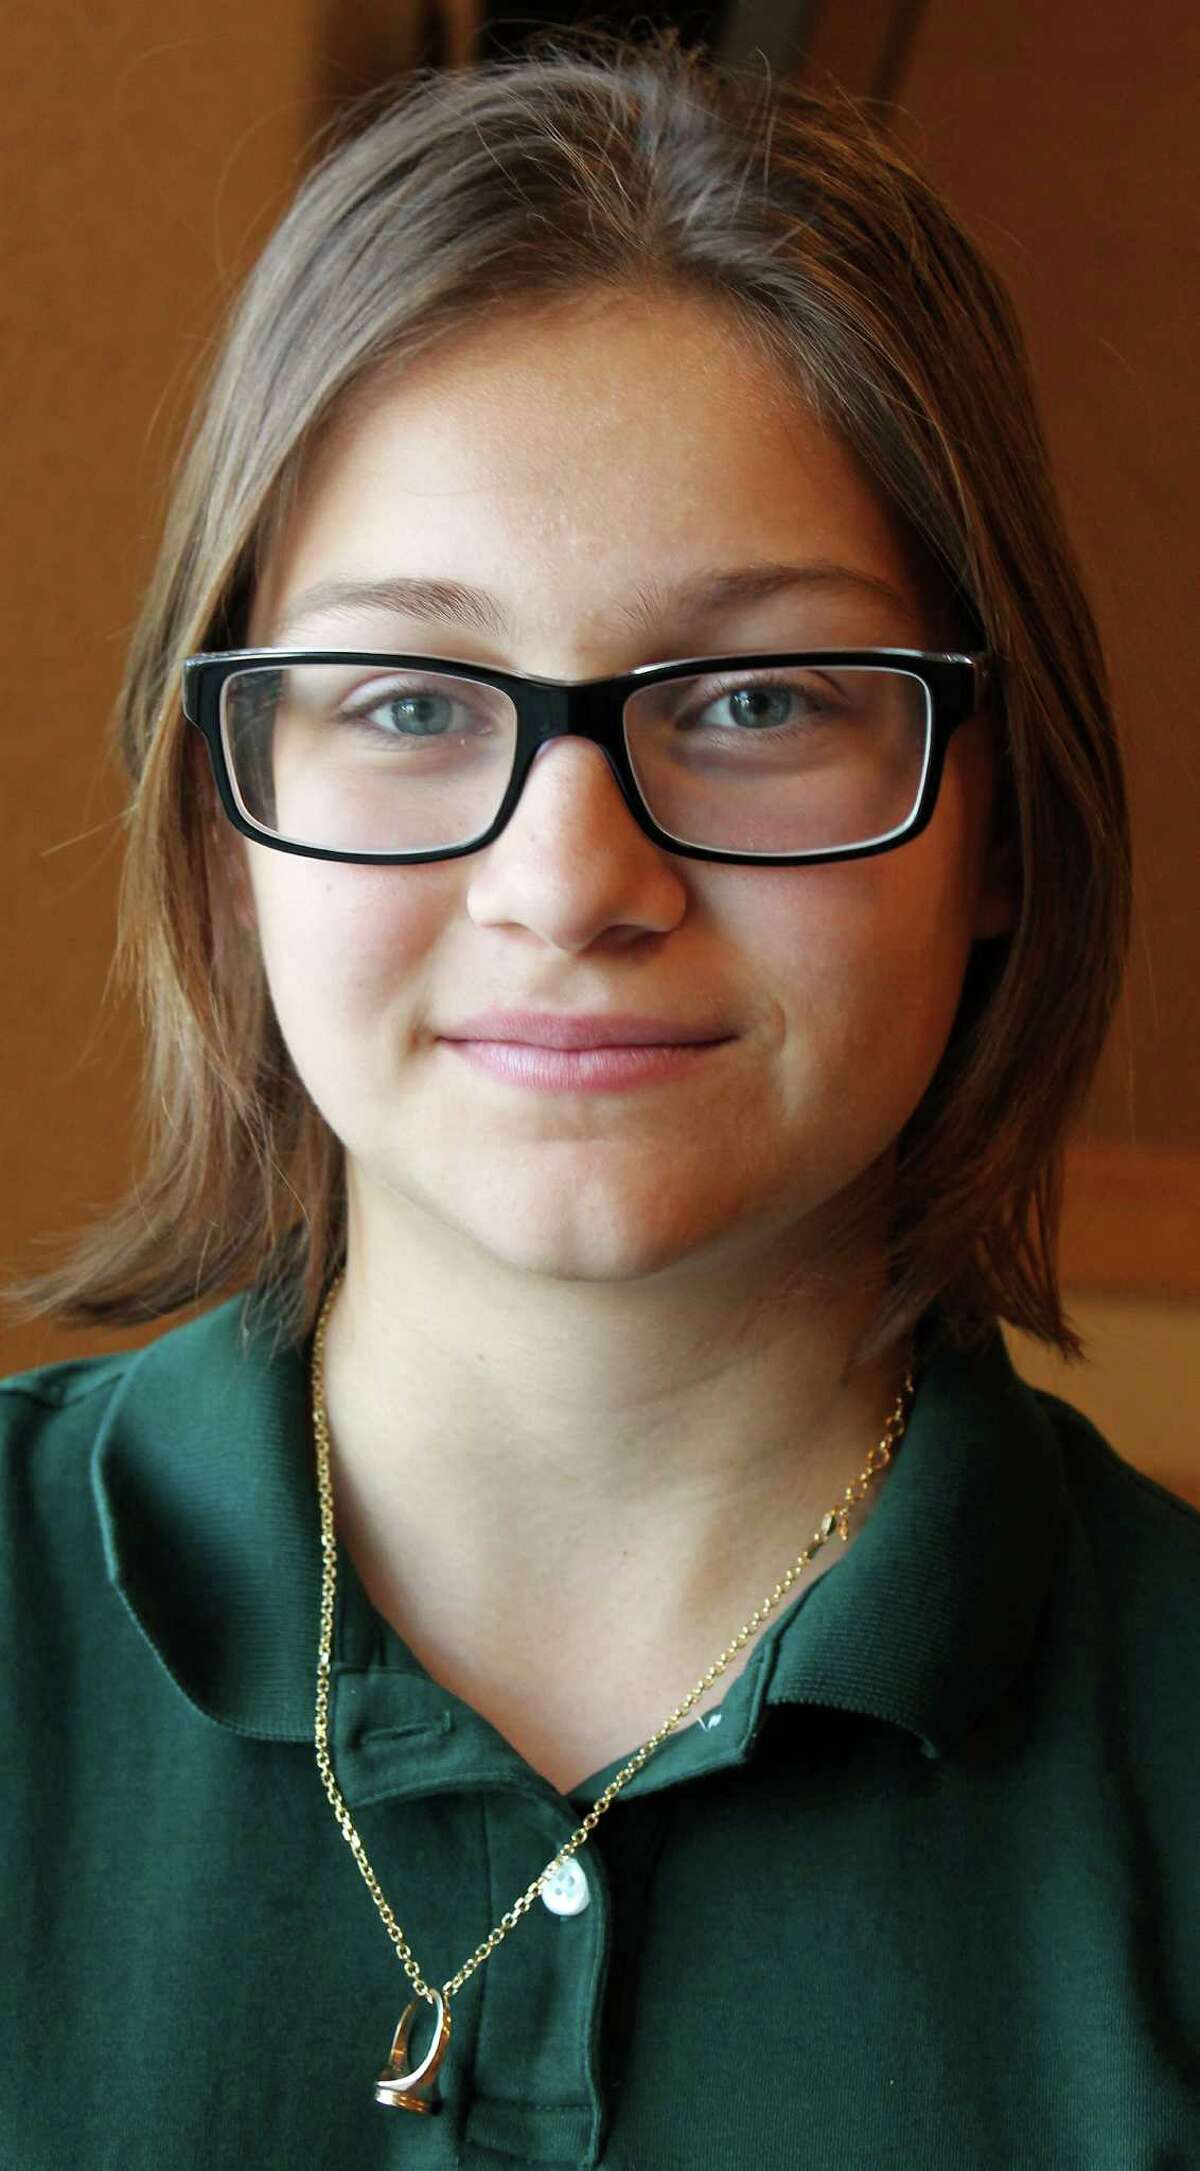 Convent of the Sacred Heart junior Julia Pogge has been a finalist in Greenwich’s diversity writing contest for three consecutive years.